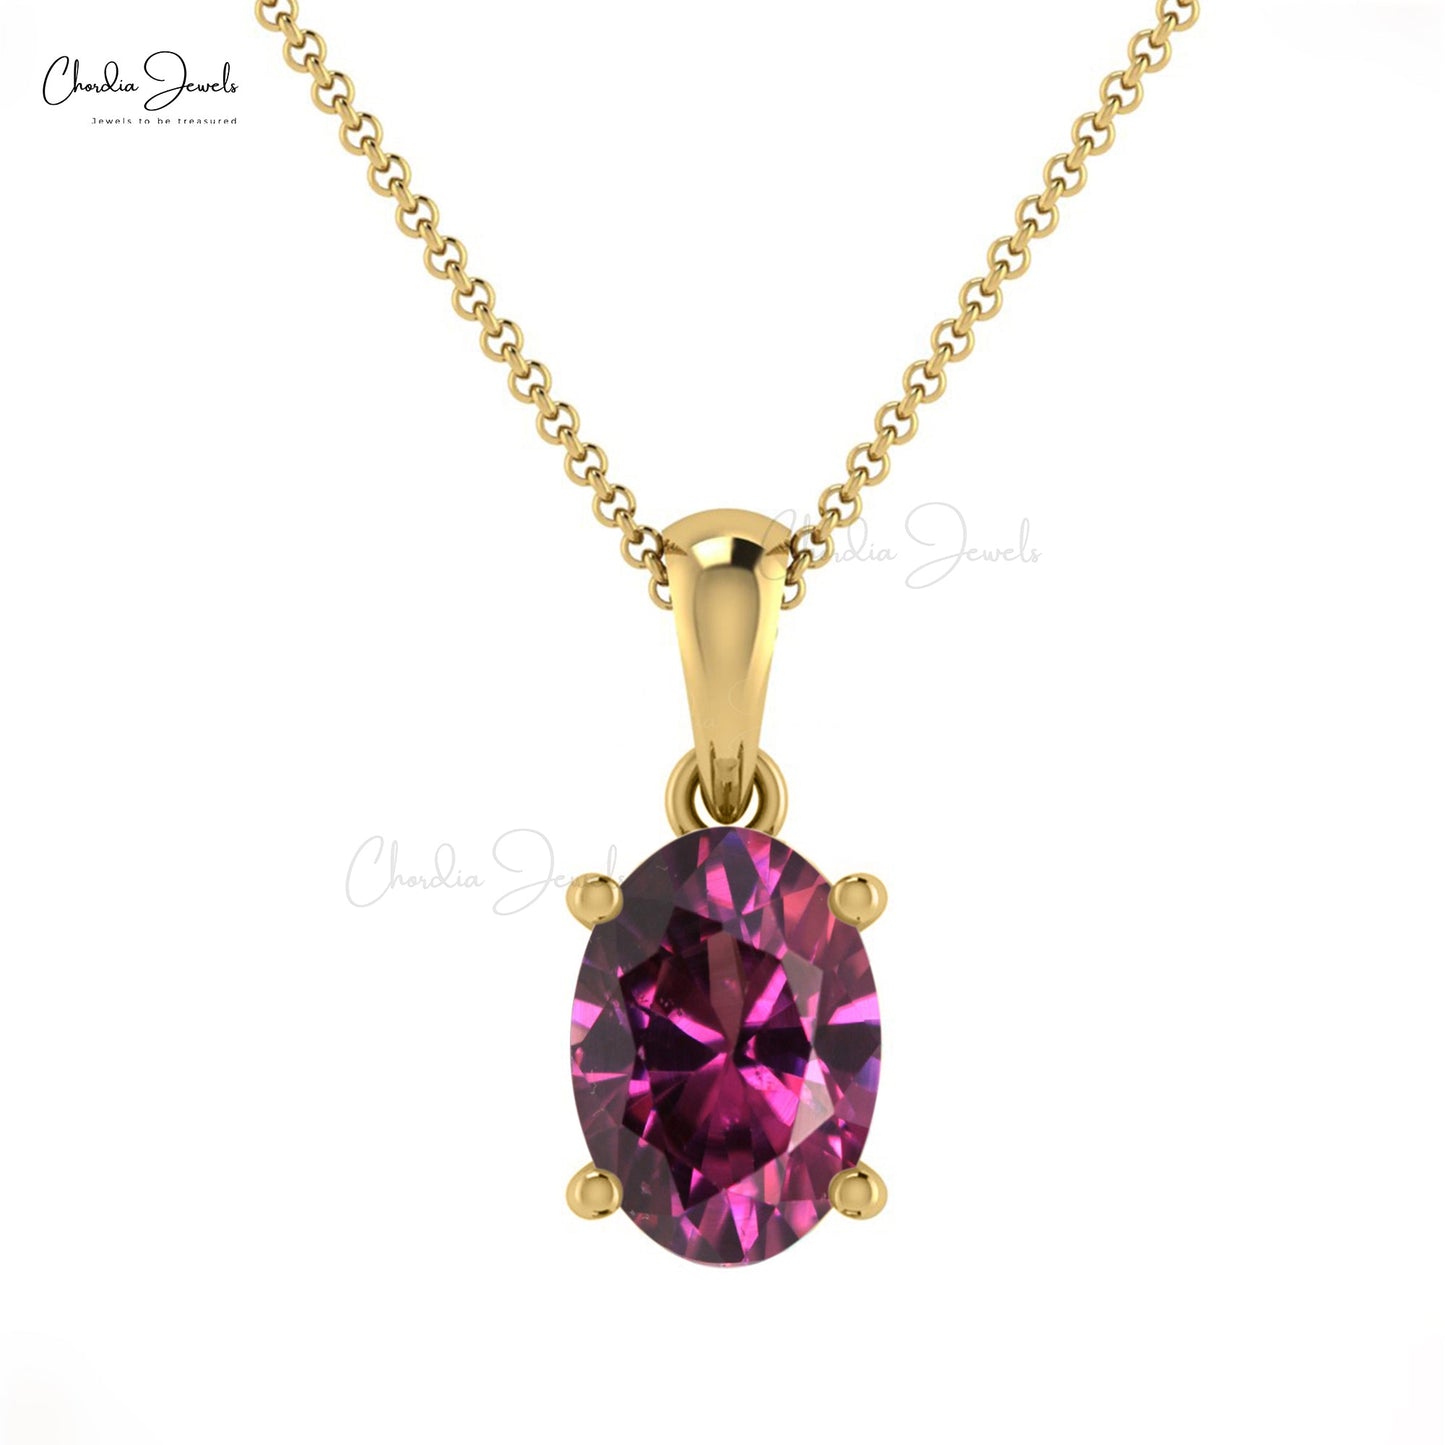 Load image into Gallery viewer, Oval Cut 7x5mm Natural Rhodolite Garnet Pendant
